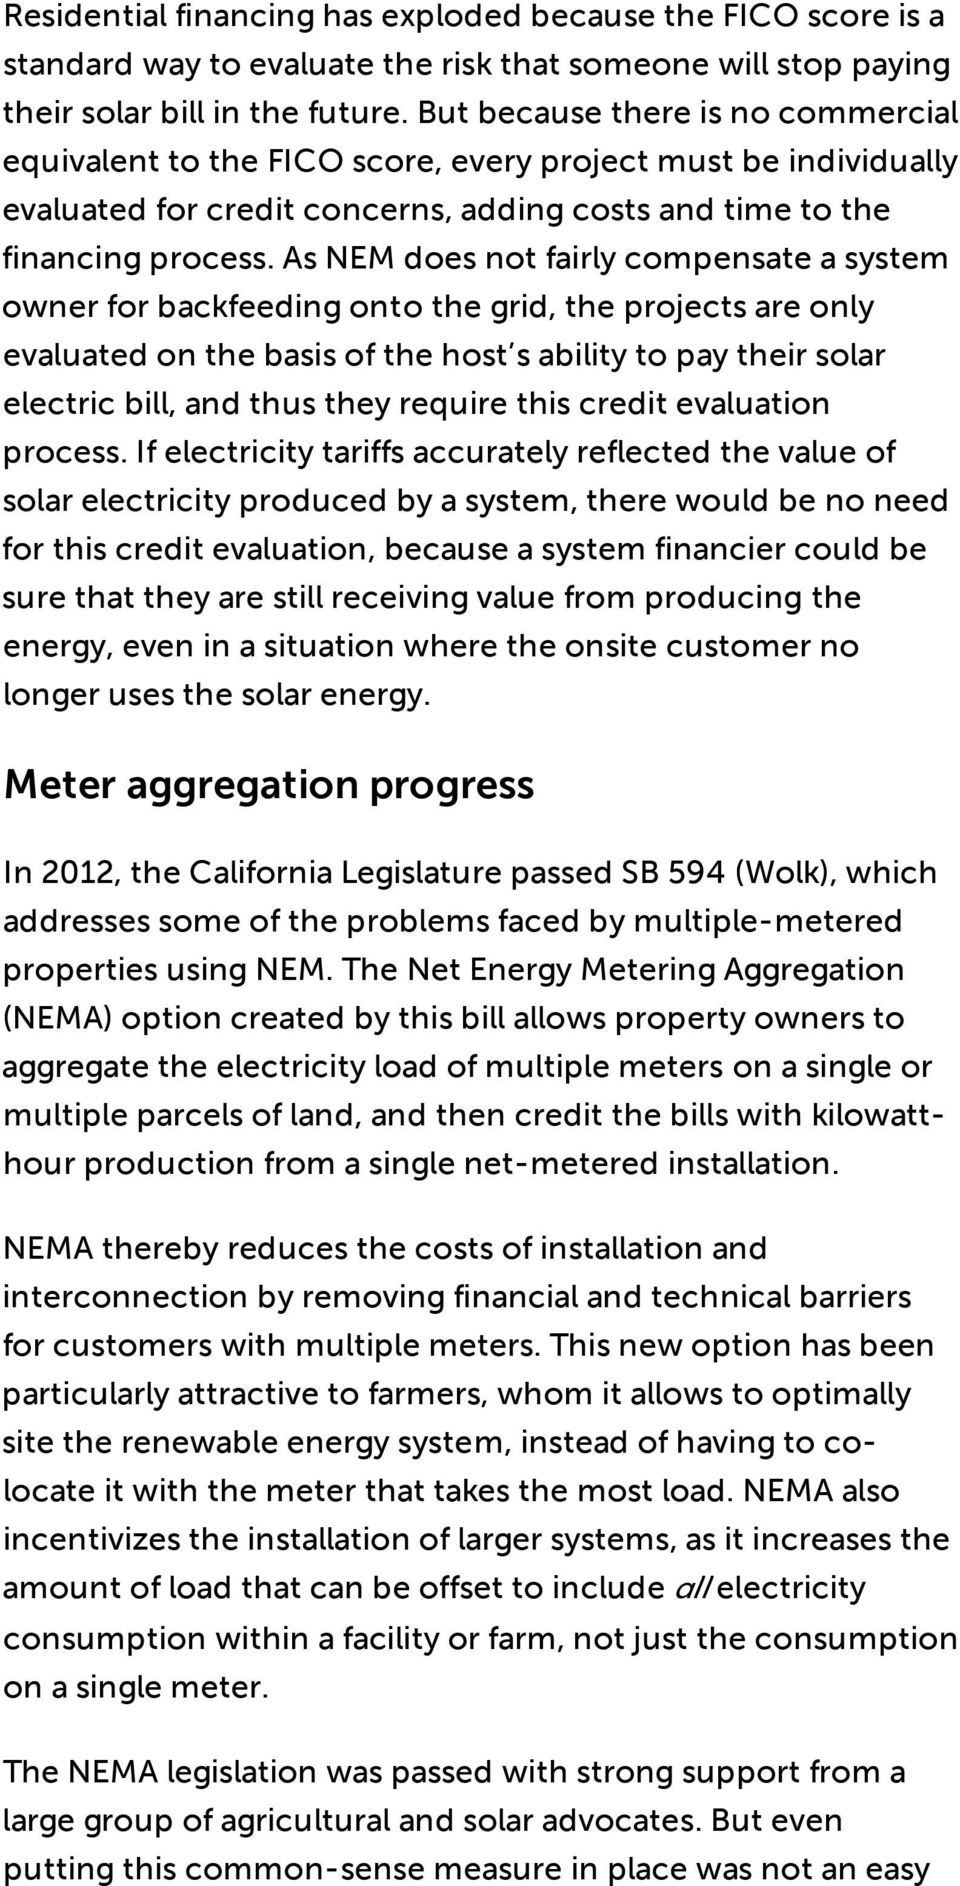 As NEM does not fairly compensate a system owner for backfeeding onto the grid, the projects are only evaluated on the basis of the host s ability to pay their solar electric bill, and thus they